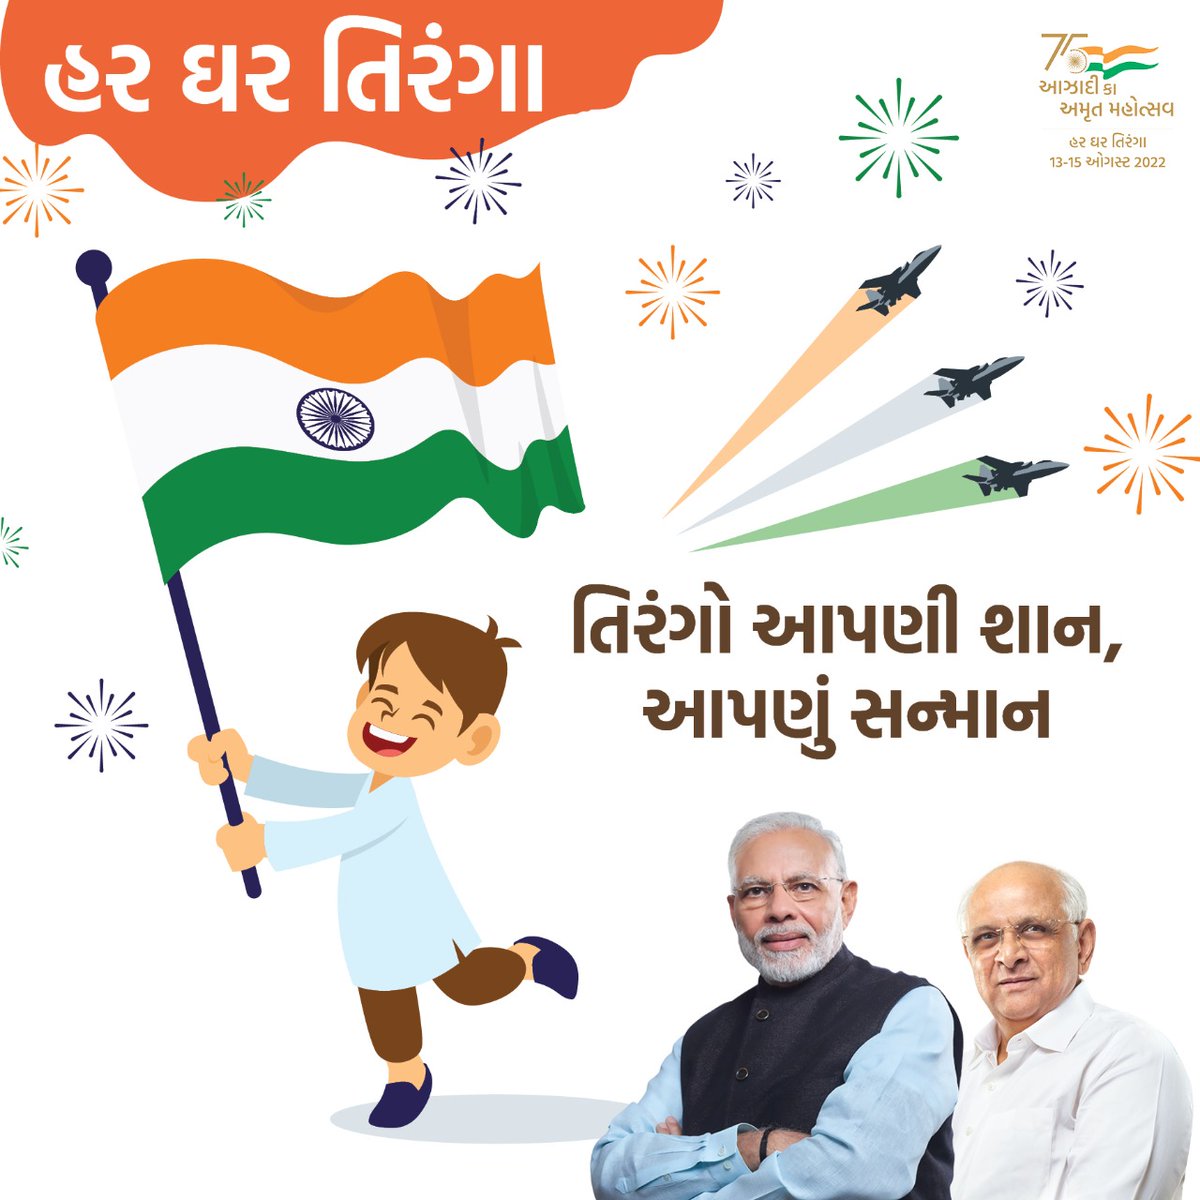 One nation, one identity- Our Tiranga! In the 75th year of our independence, let's bring our National Flag home, proudly fly it from 13th to 15th August and show the world we are one! #HarGharTiranga @narendramodi @Bhupendrapbjp @cmogujarat @AmritMahotsav @EducationGujGov